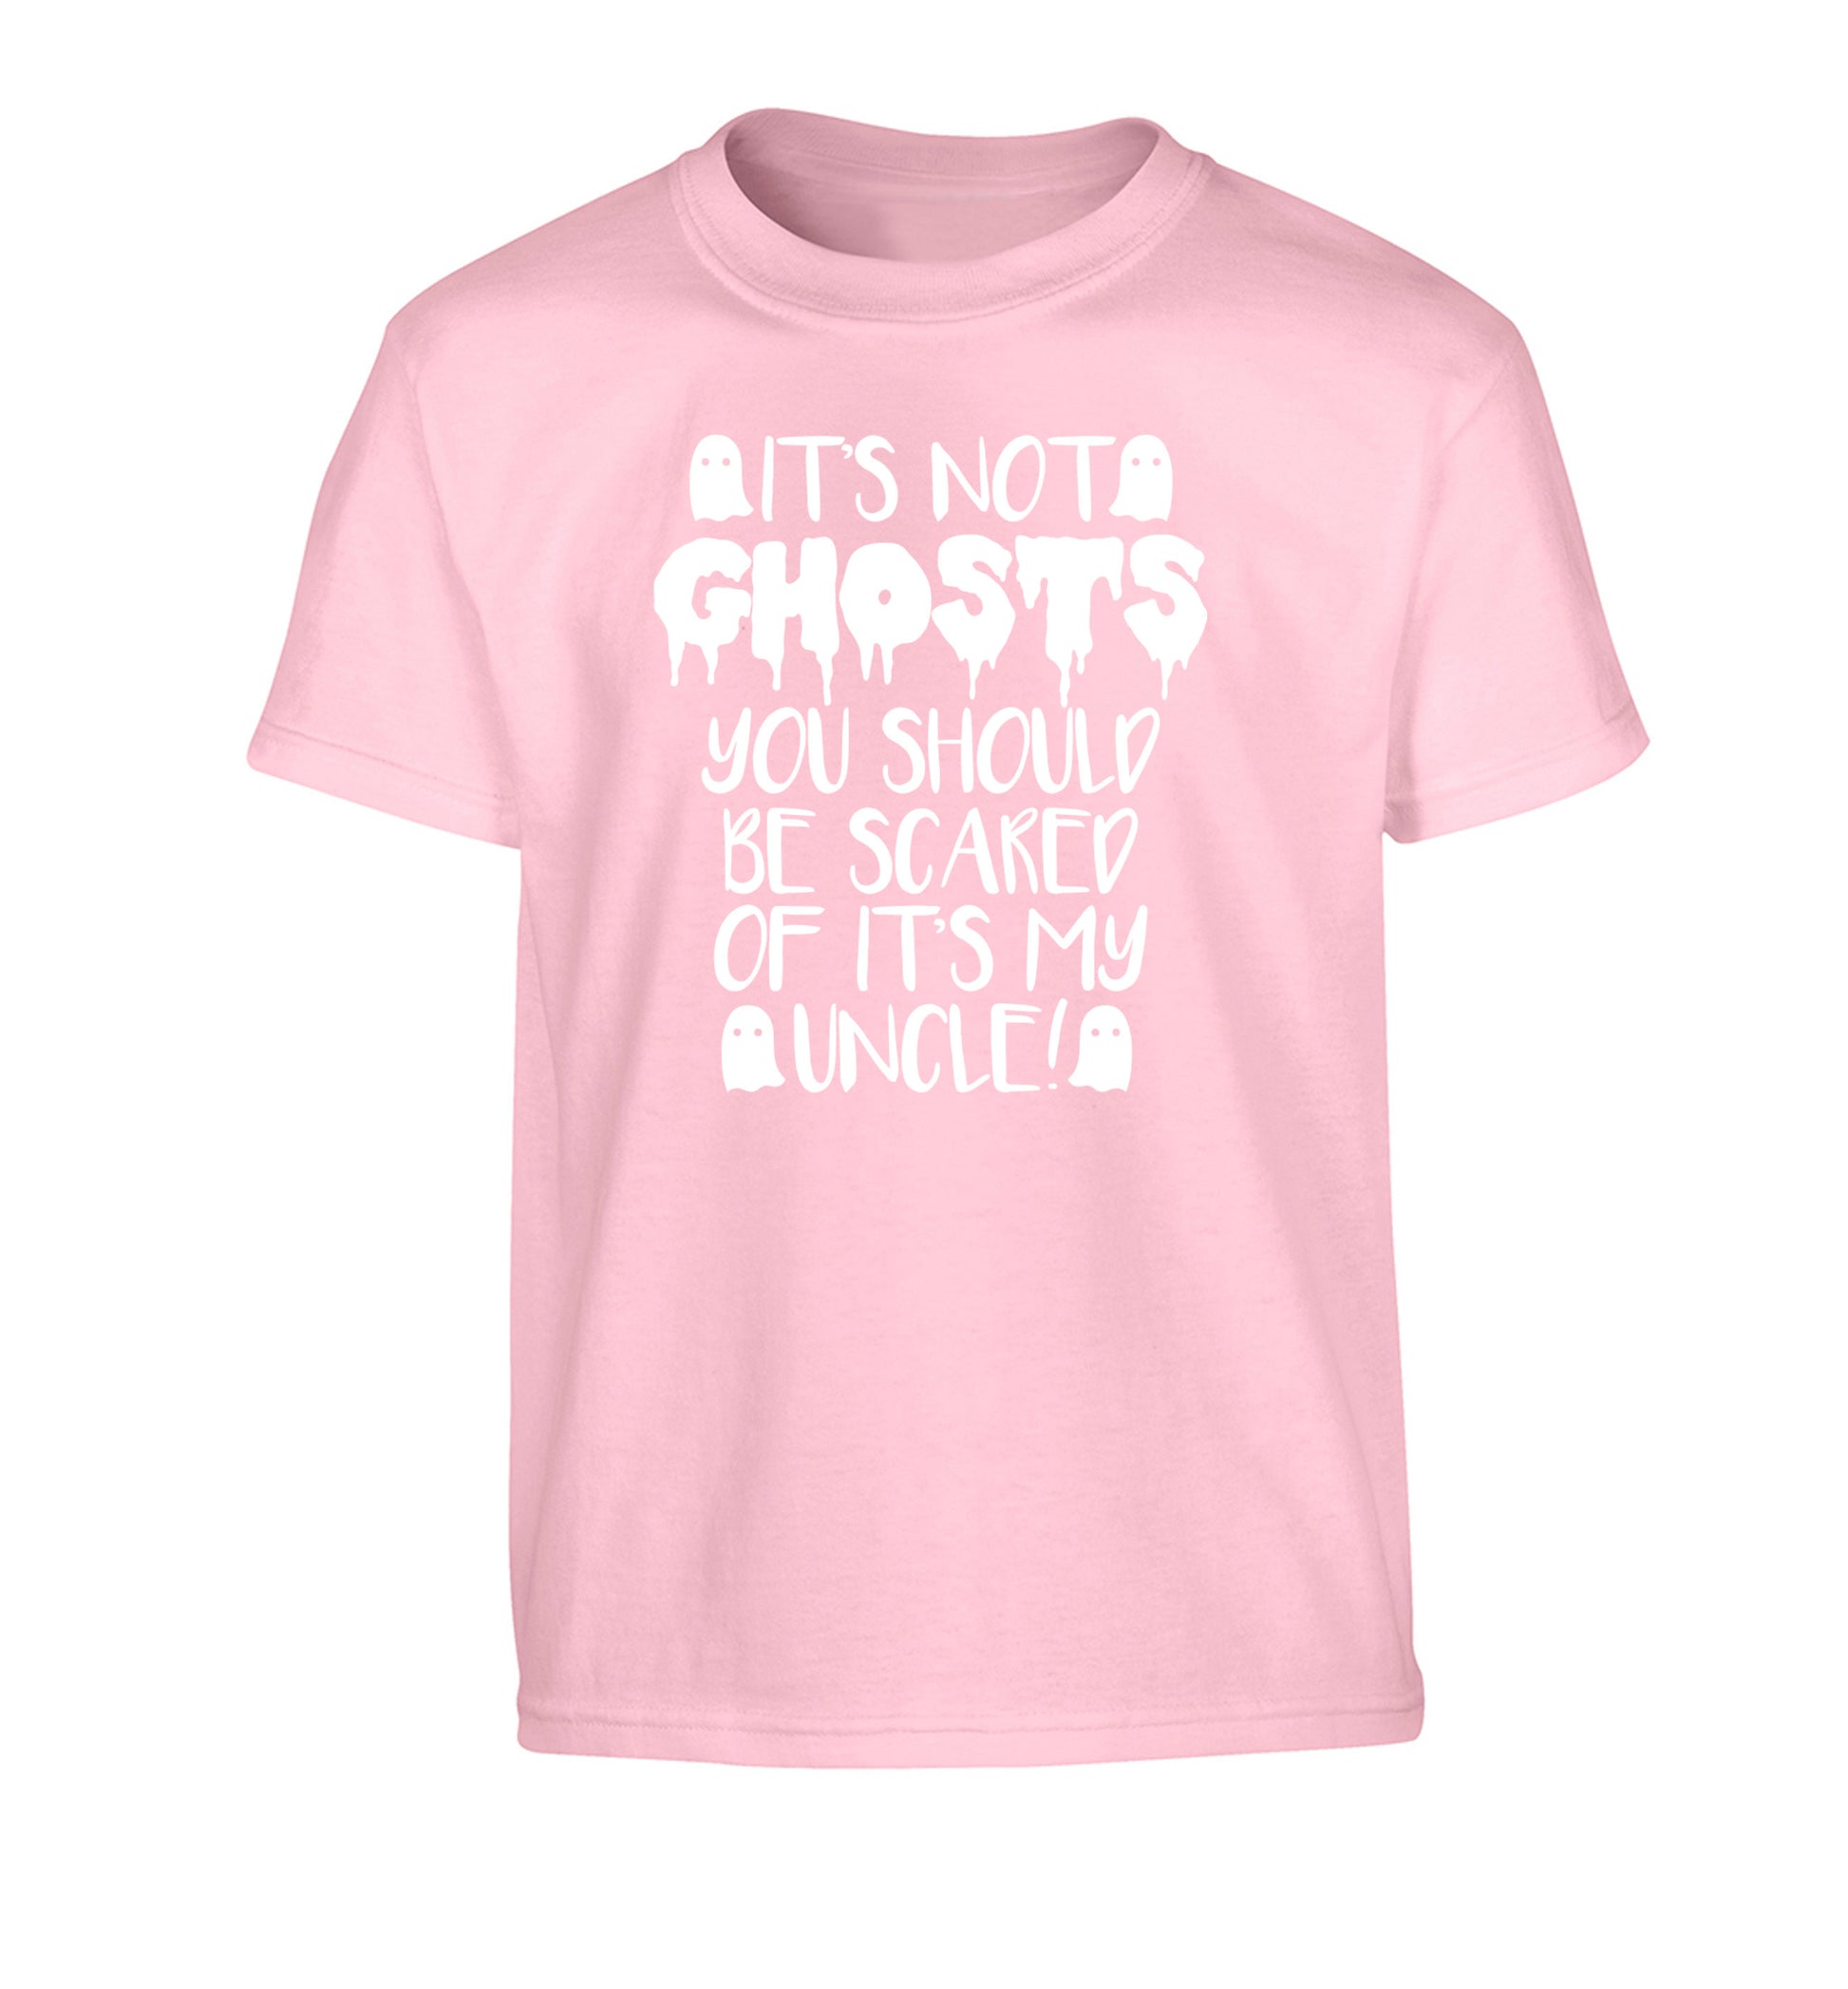 It's not ghosts you should be scared of it's my uncle! Children's light pink Tshirt 12-14 Years